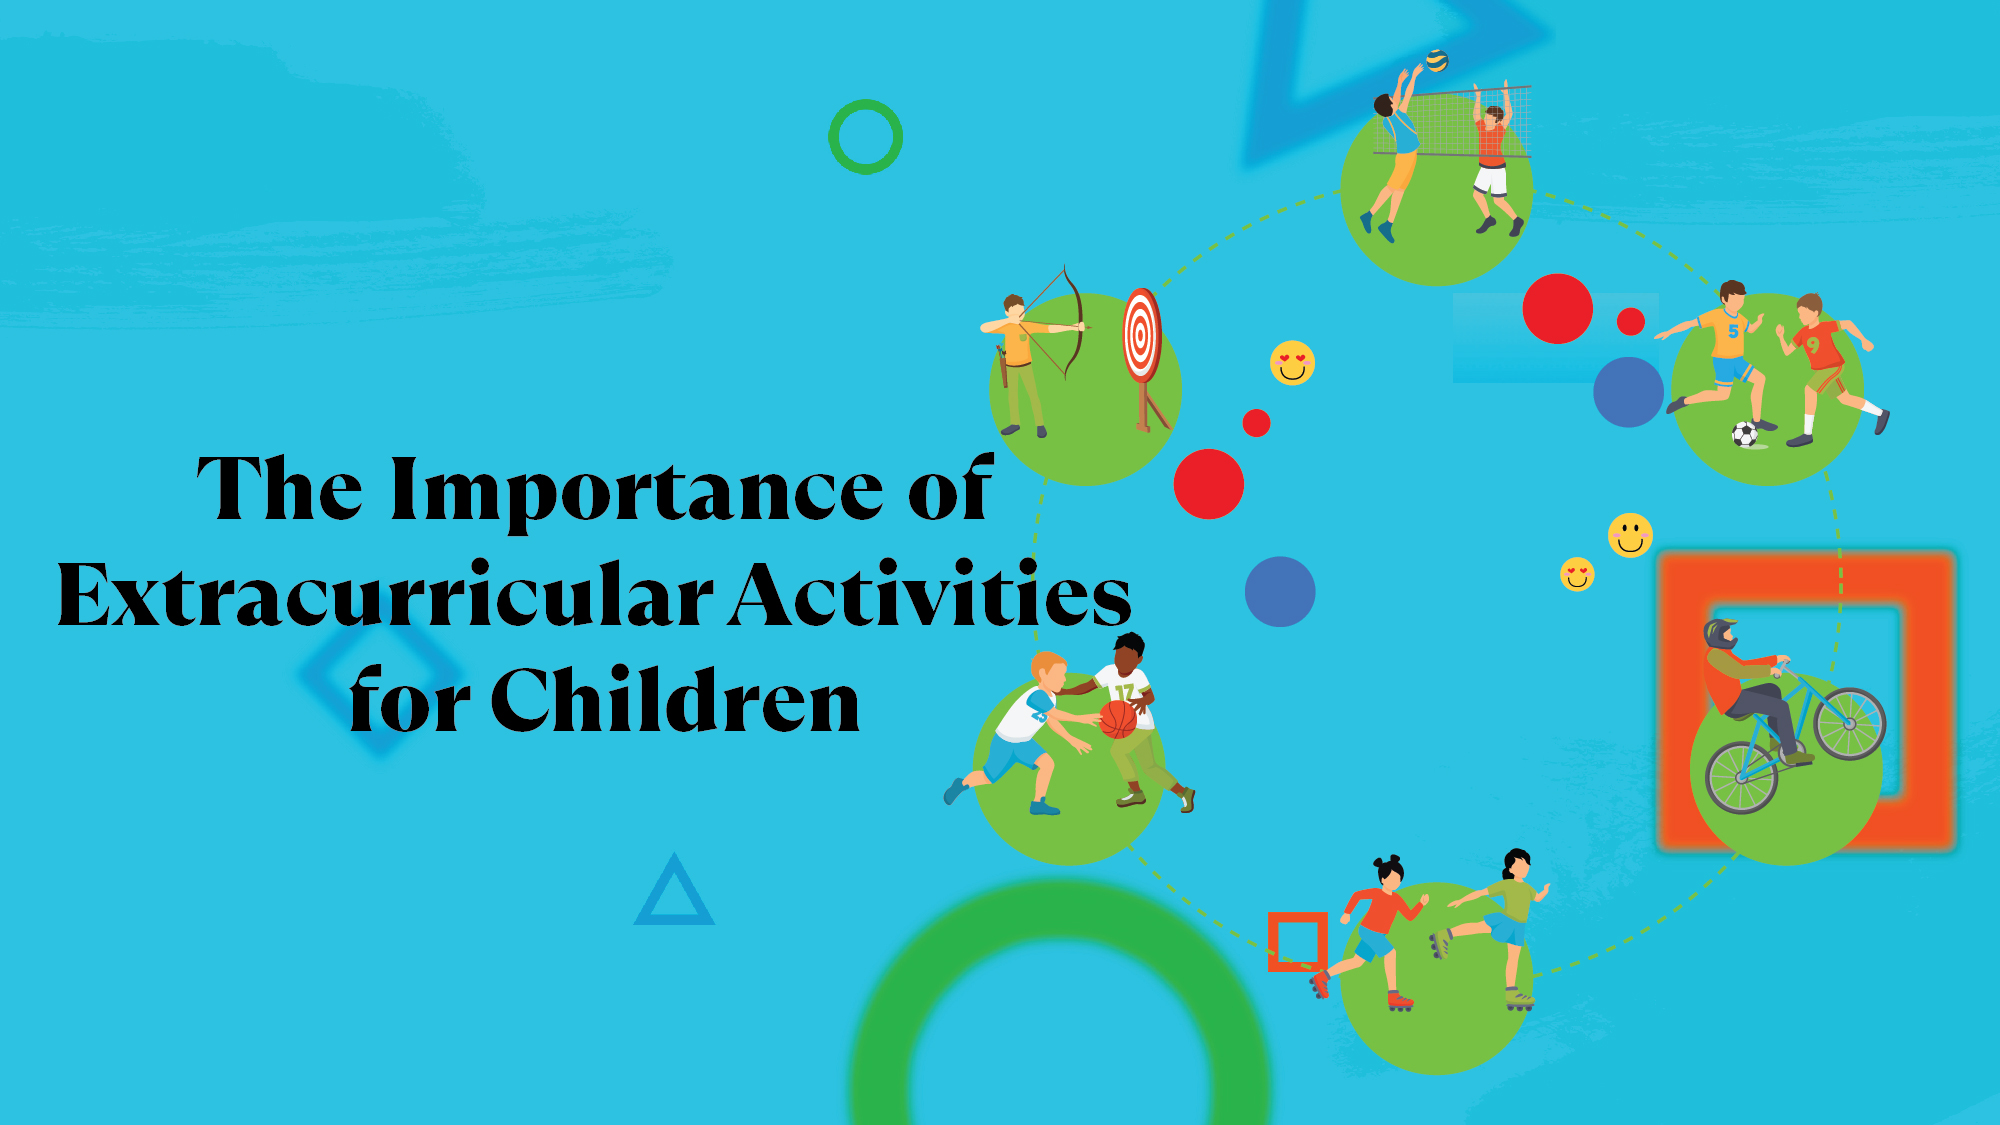 The Importance of Extracurricular Activities for Children